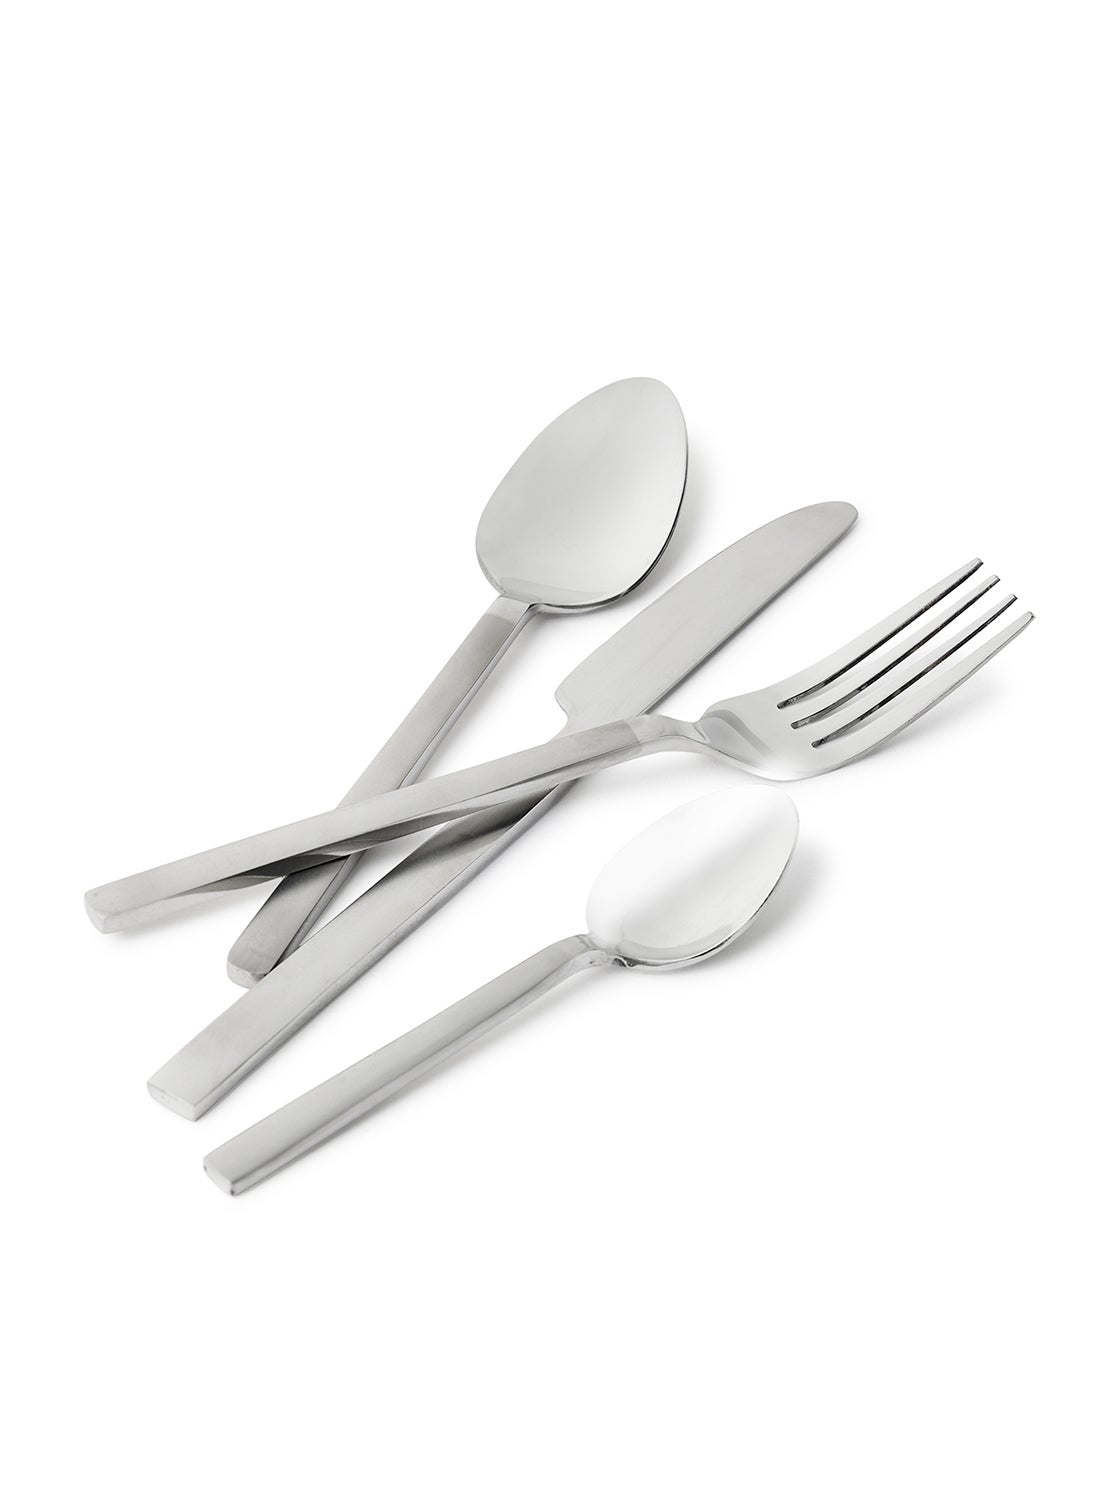 24 Piece Cutlery Set - Made Of Stainless Steel - Silverware Flatware - Spoons And Forks Set, Spoon Set - Table Spoons, Tea Spoons, Forks, Knives - Serves 6 - Design Silver Antila 